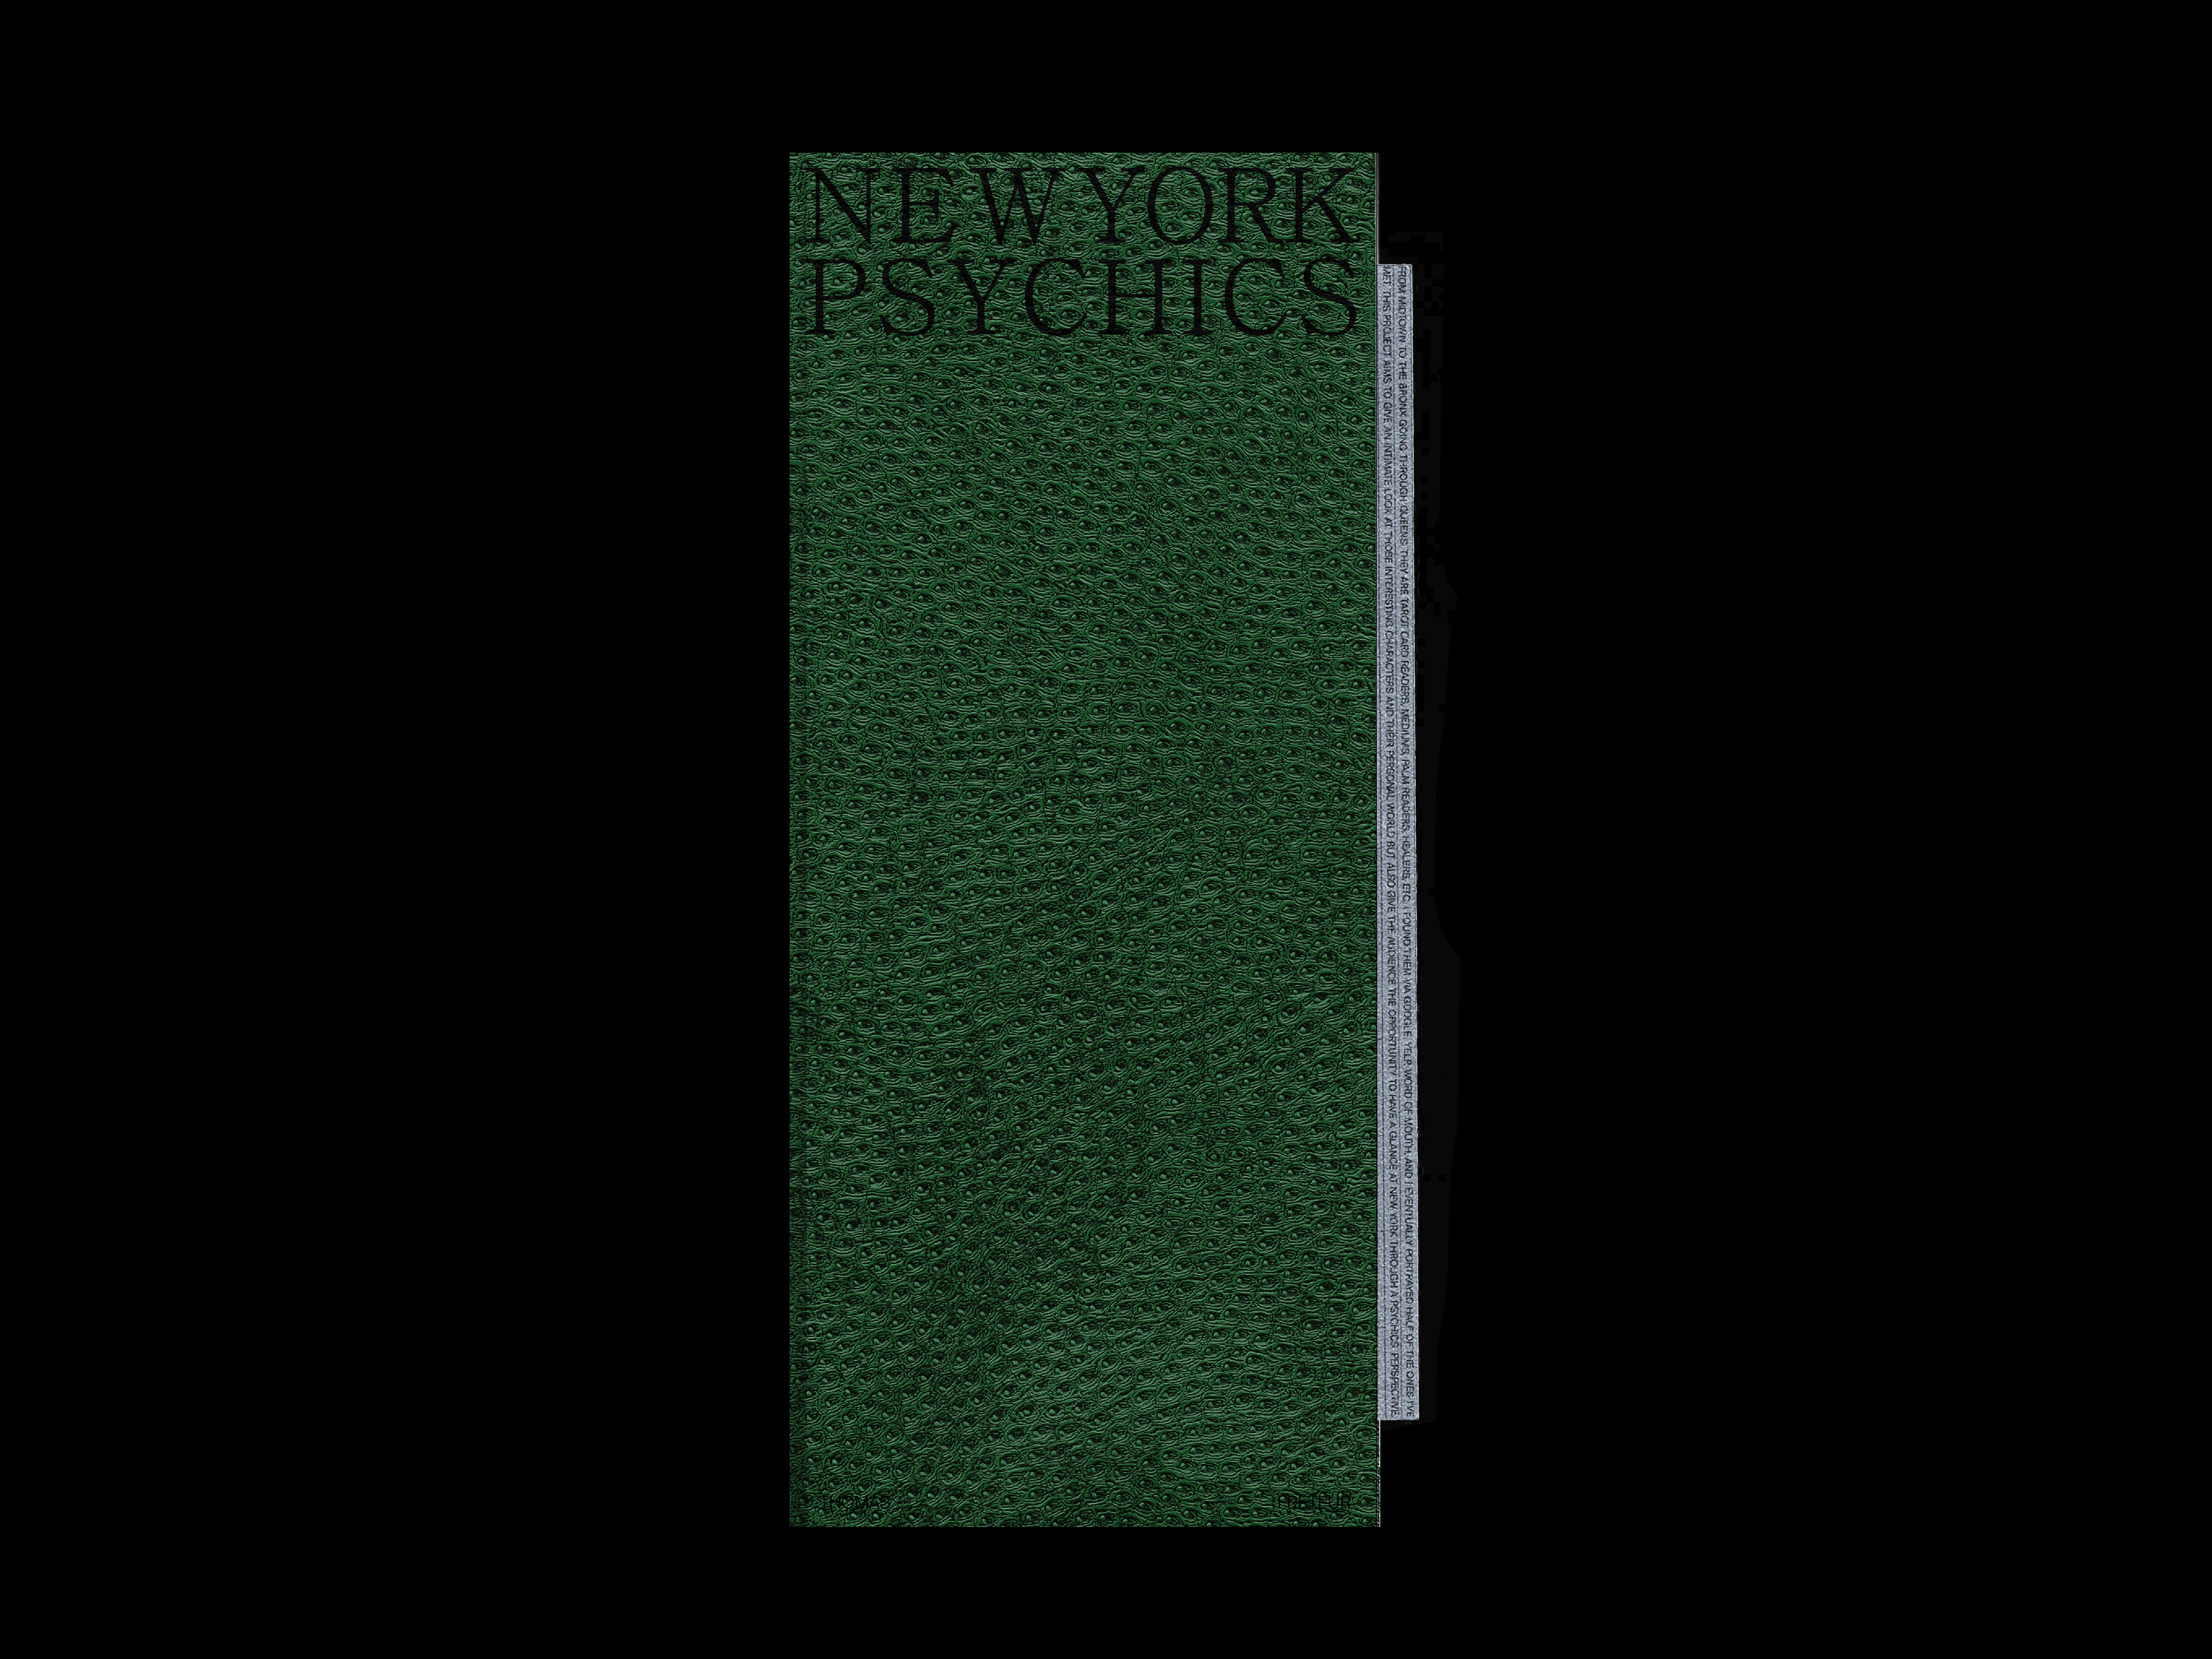 https://julienbaiamonte.com/content/1-projects/new-york-psychics/nyc_psychics_scan004_baiamonte_251019.png.png